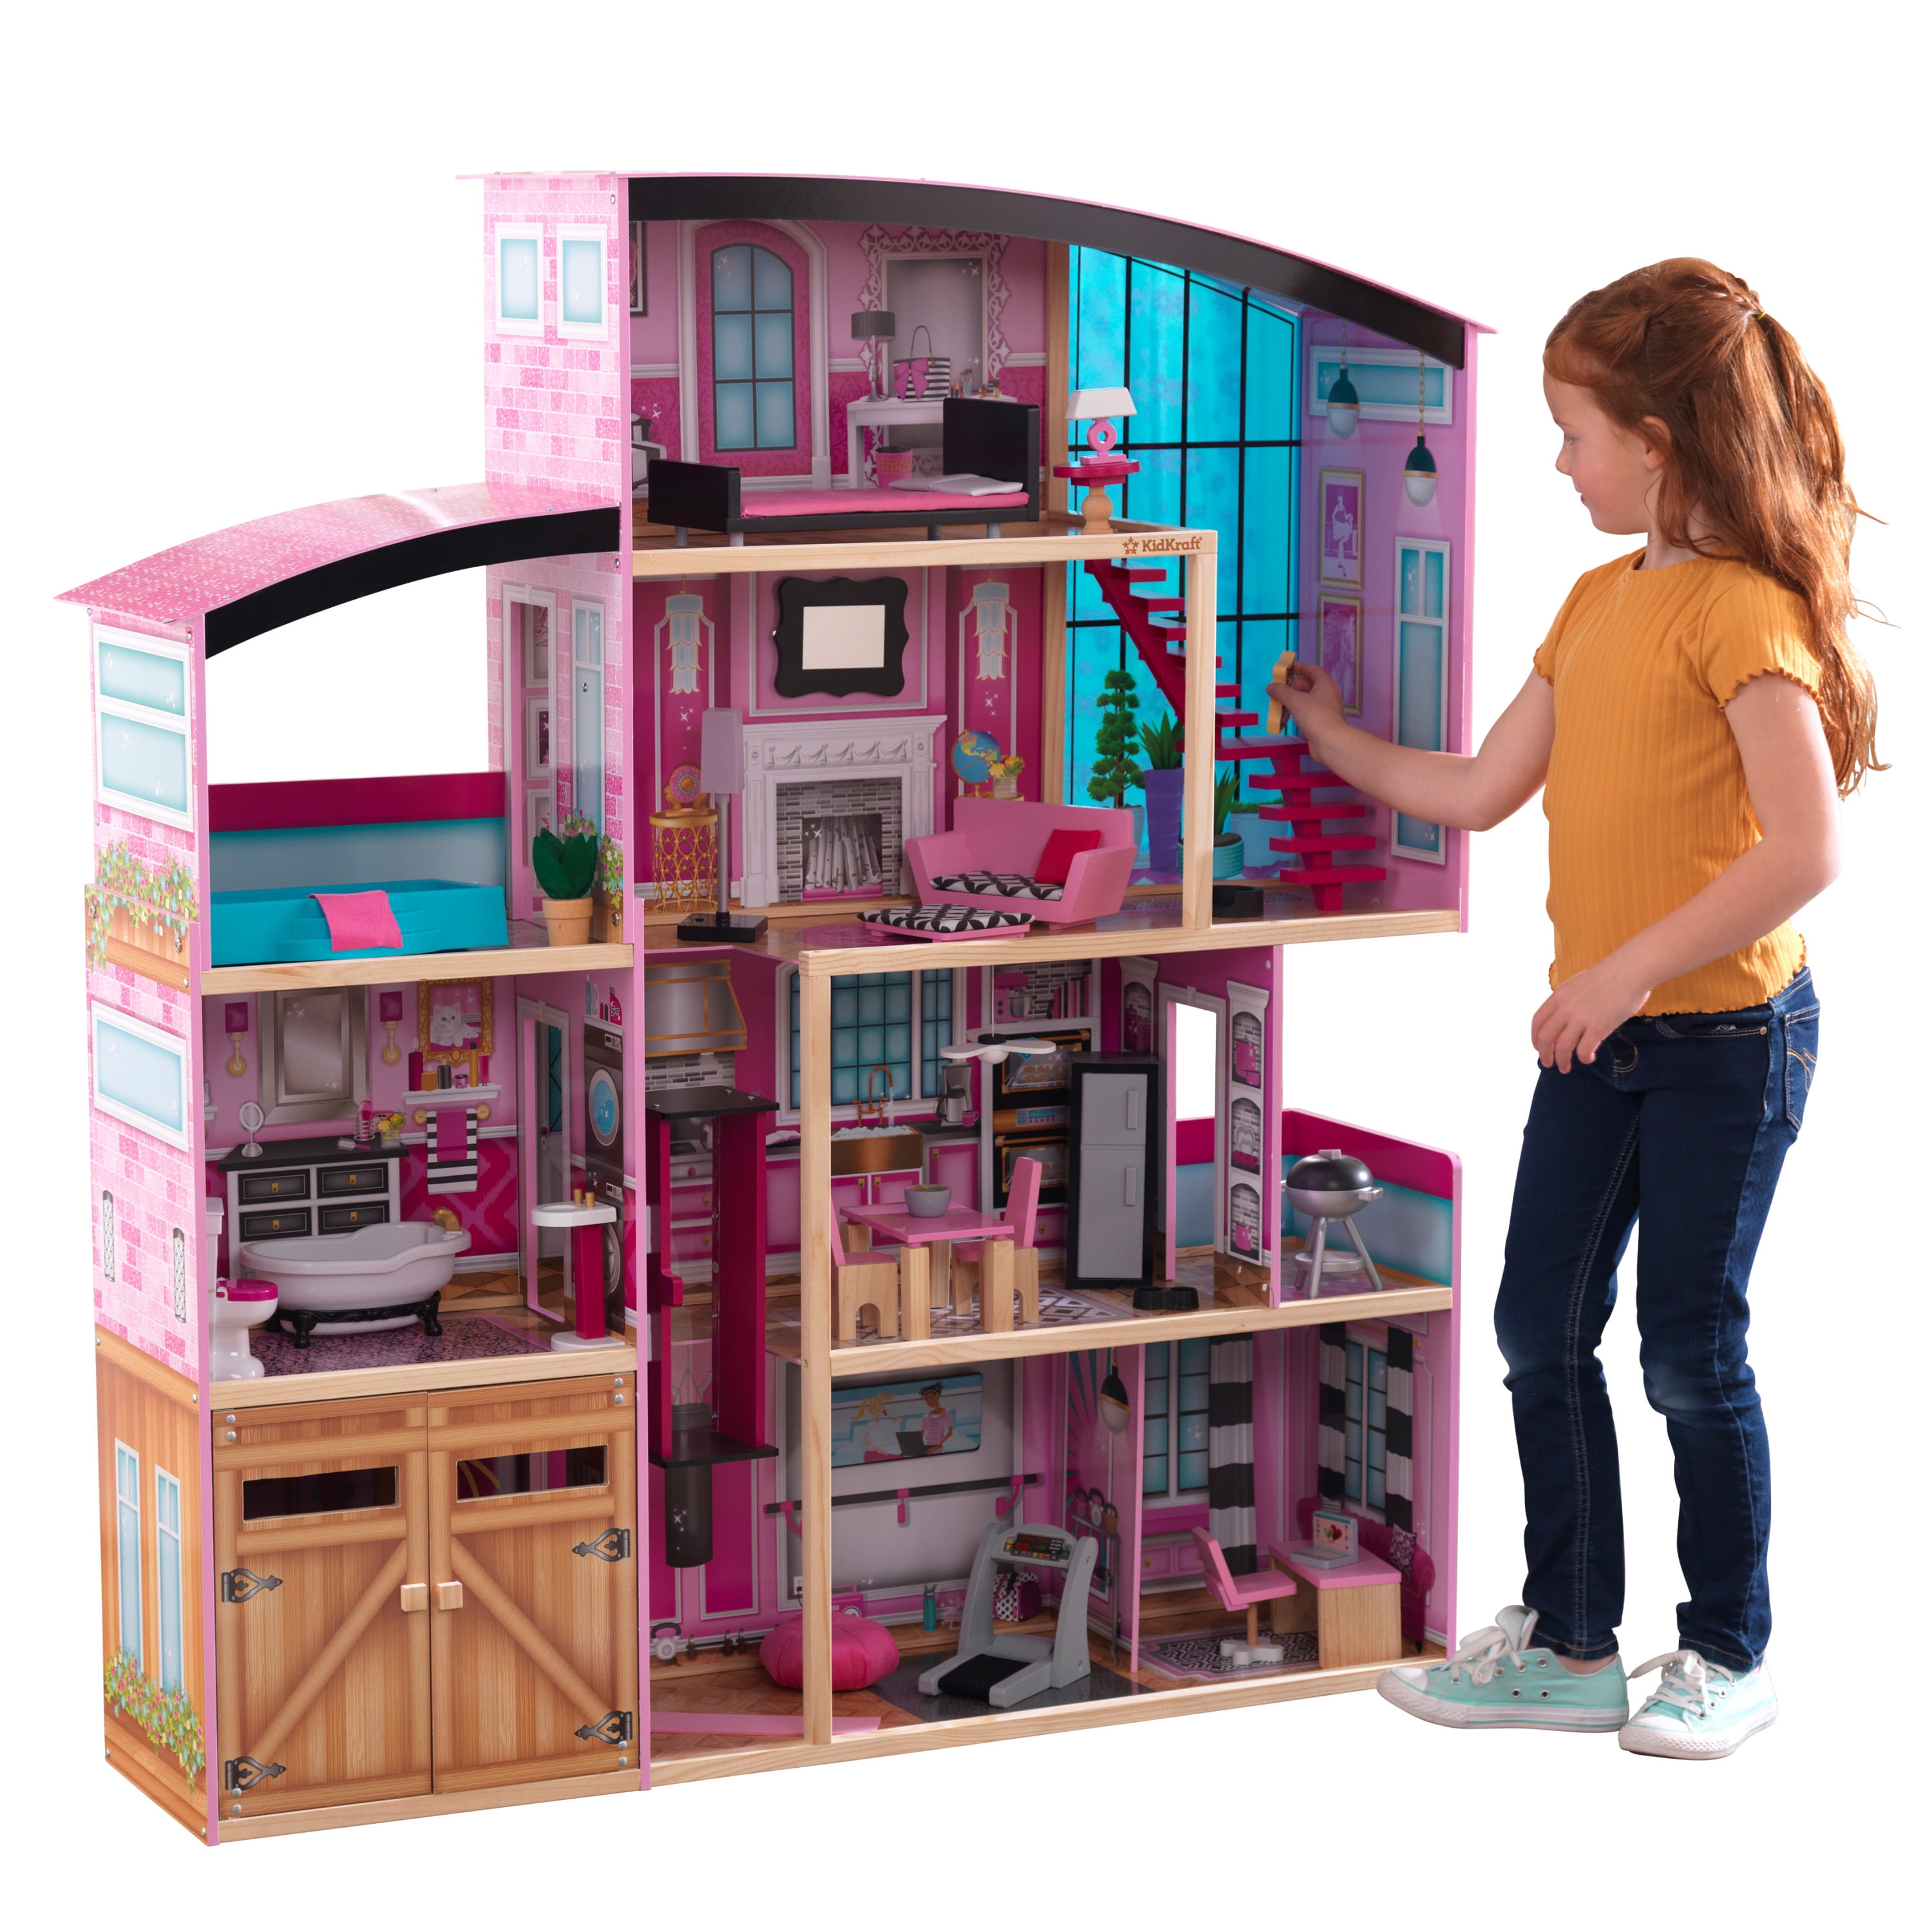 KidKraft Uptown Wooden Dollhouse With 35 Pieces of Furniture 